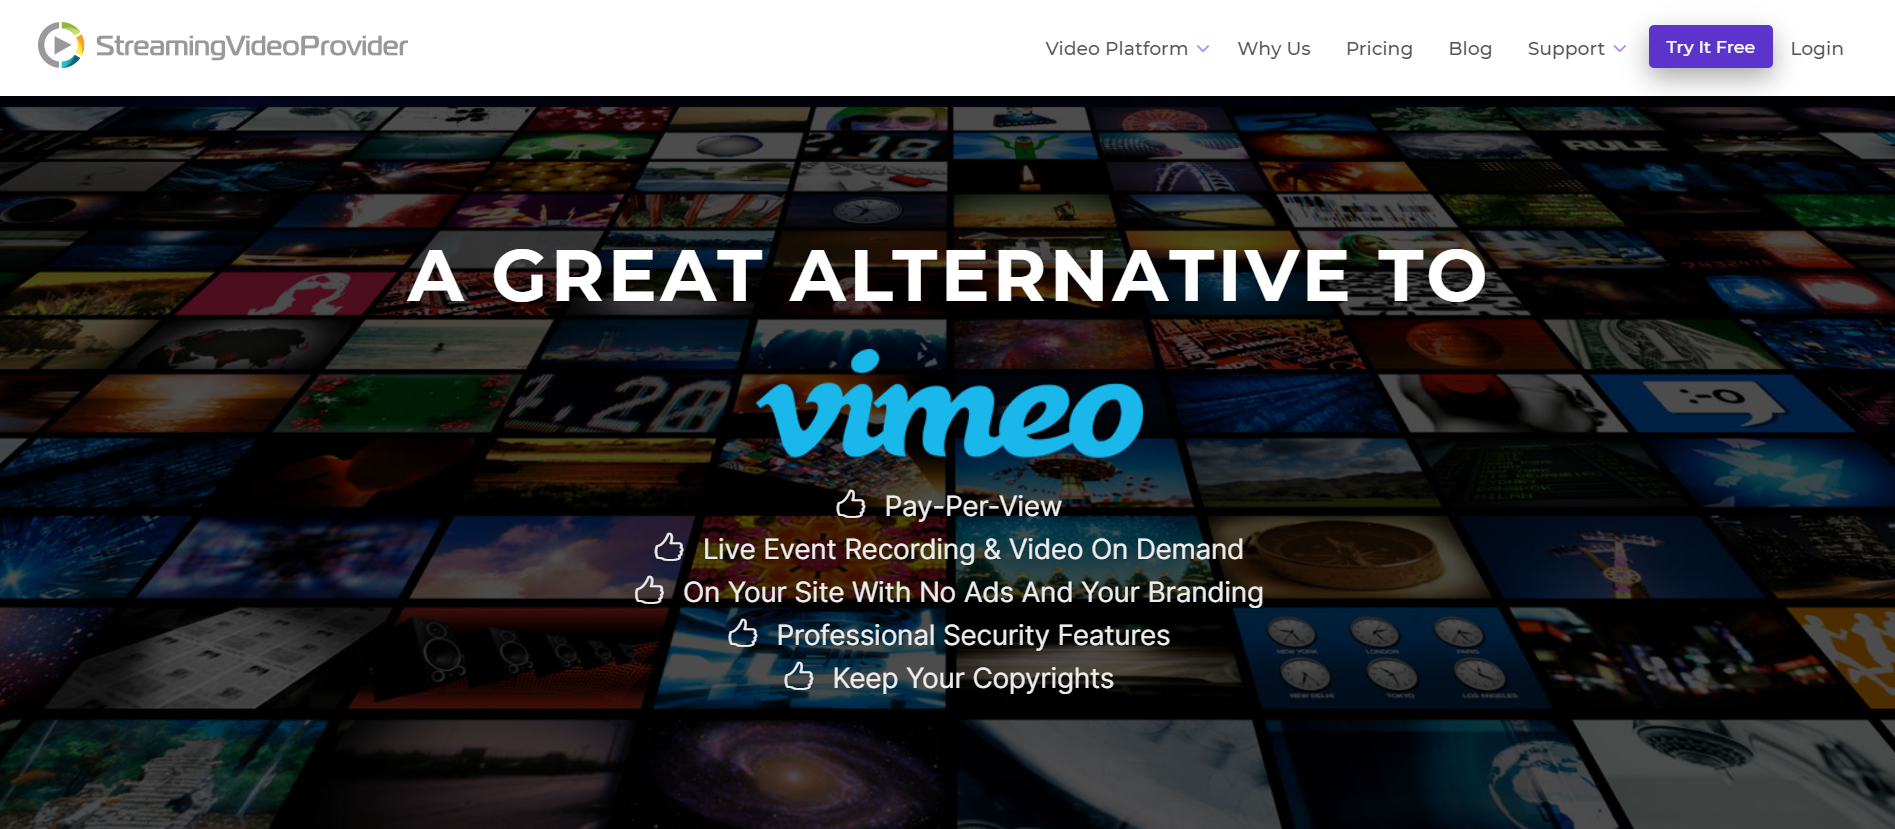 Vimeo Live Streaming Alternatives with Pay-Per-View